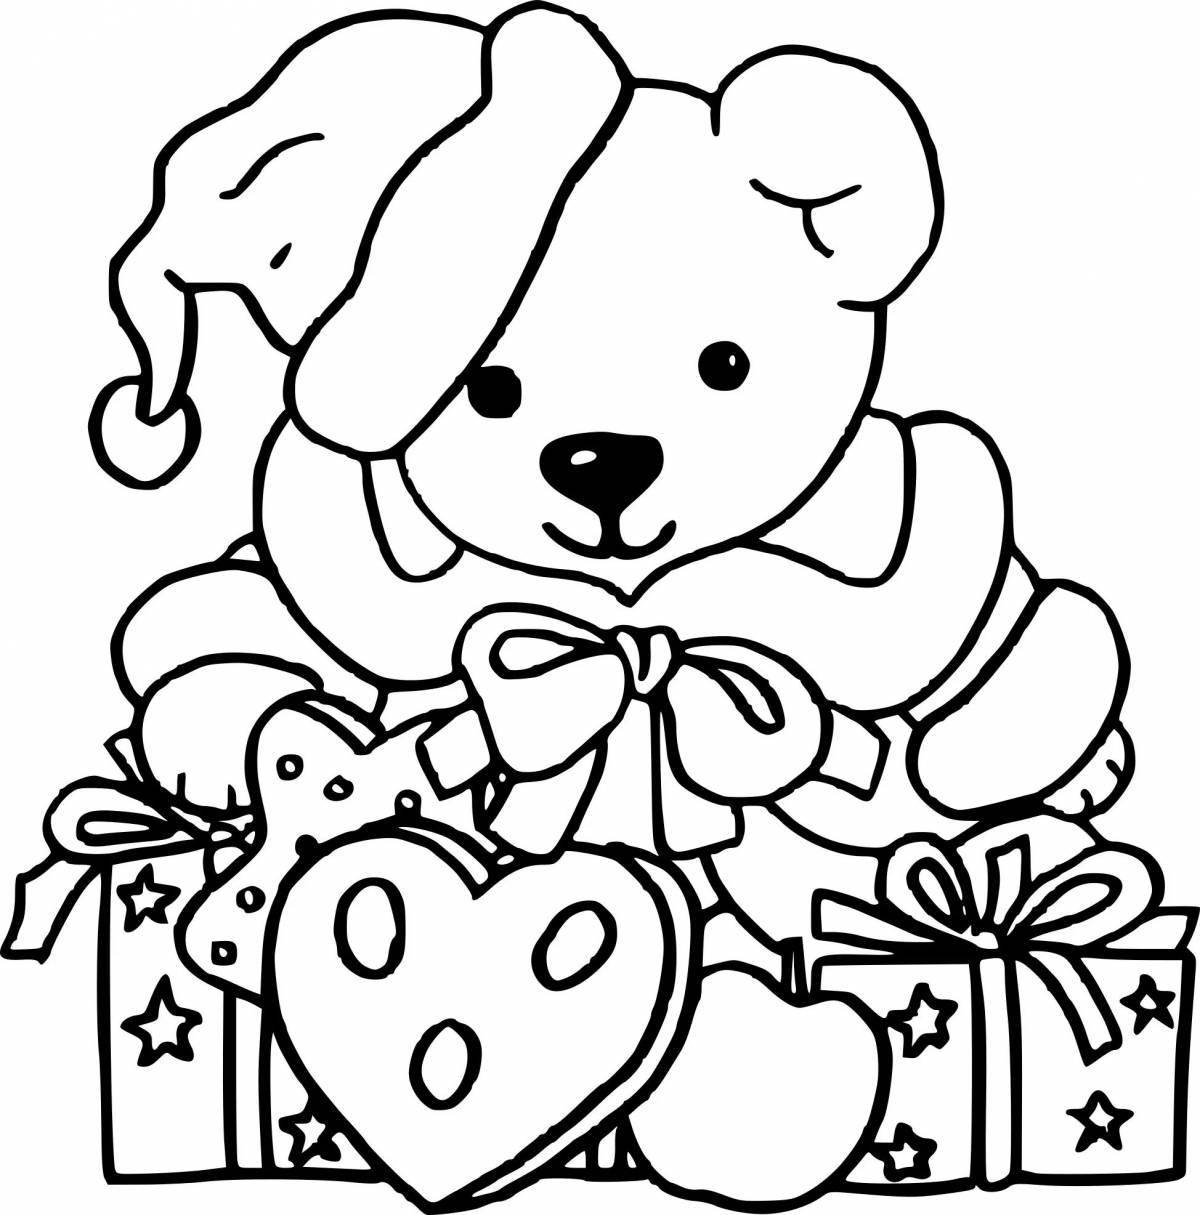 Coloring book luxury gift for mom